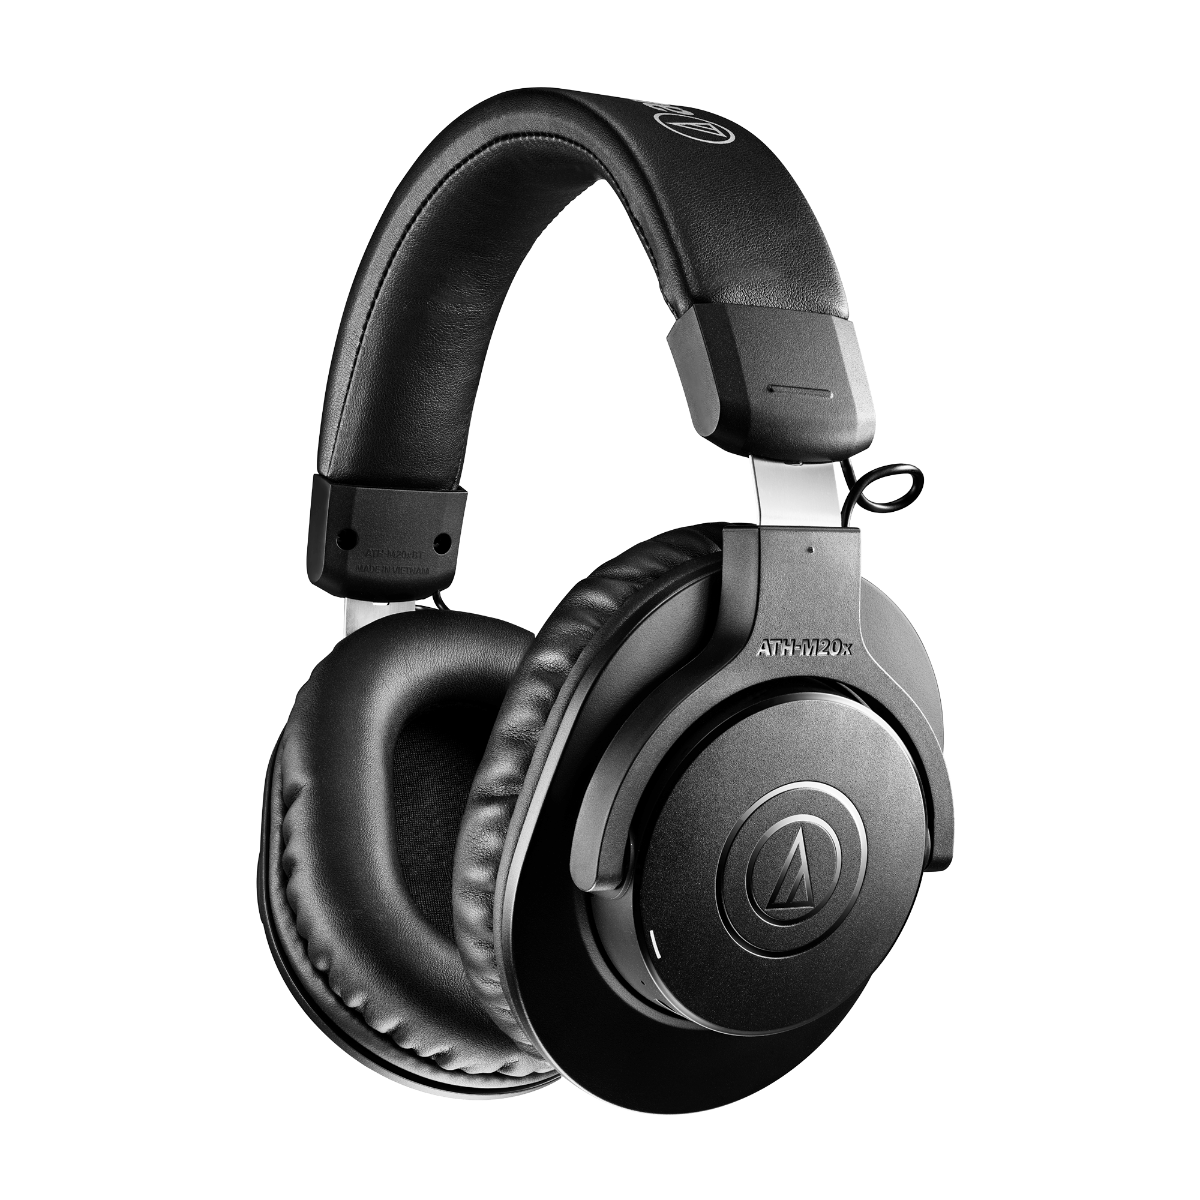 Audio-Technica white background product image of the ATH-M20XBT Wireless Headphones